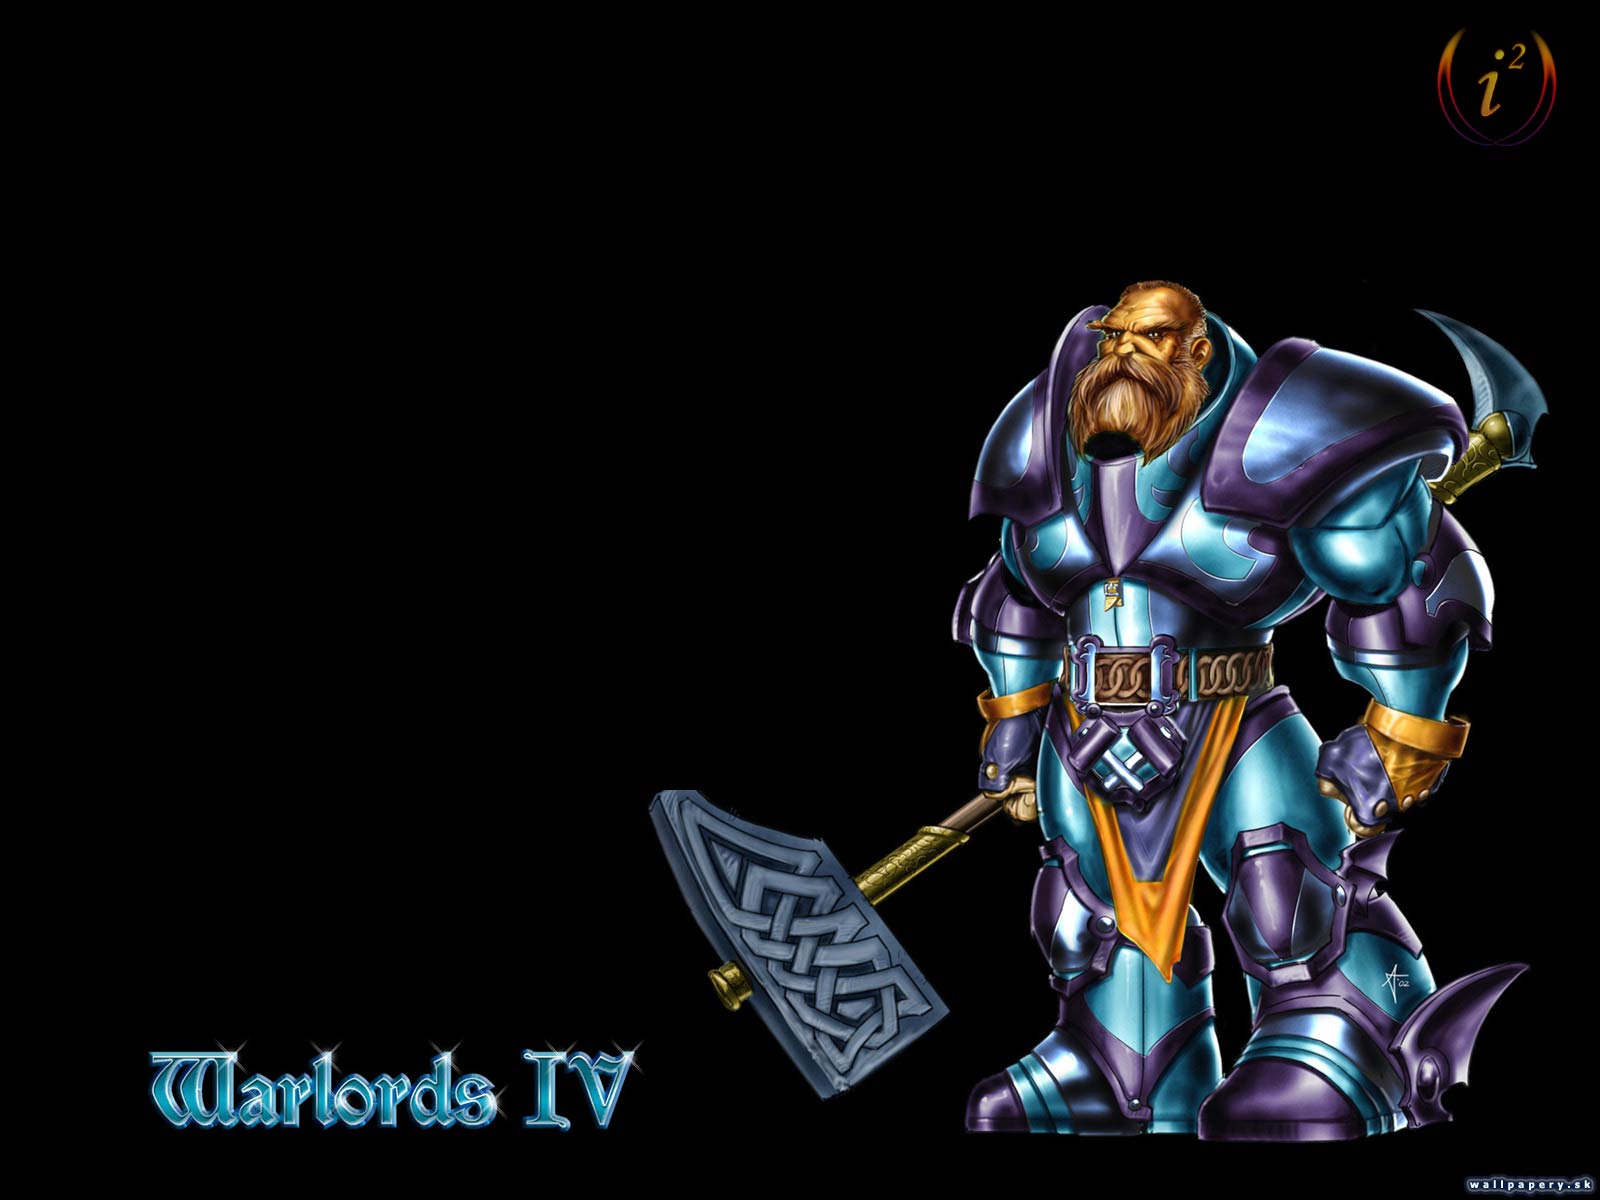 Warlords 4: Heroes of Etheria - wallpaper 1